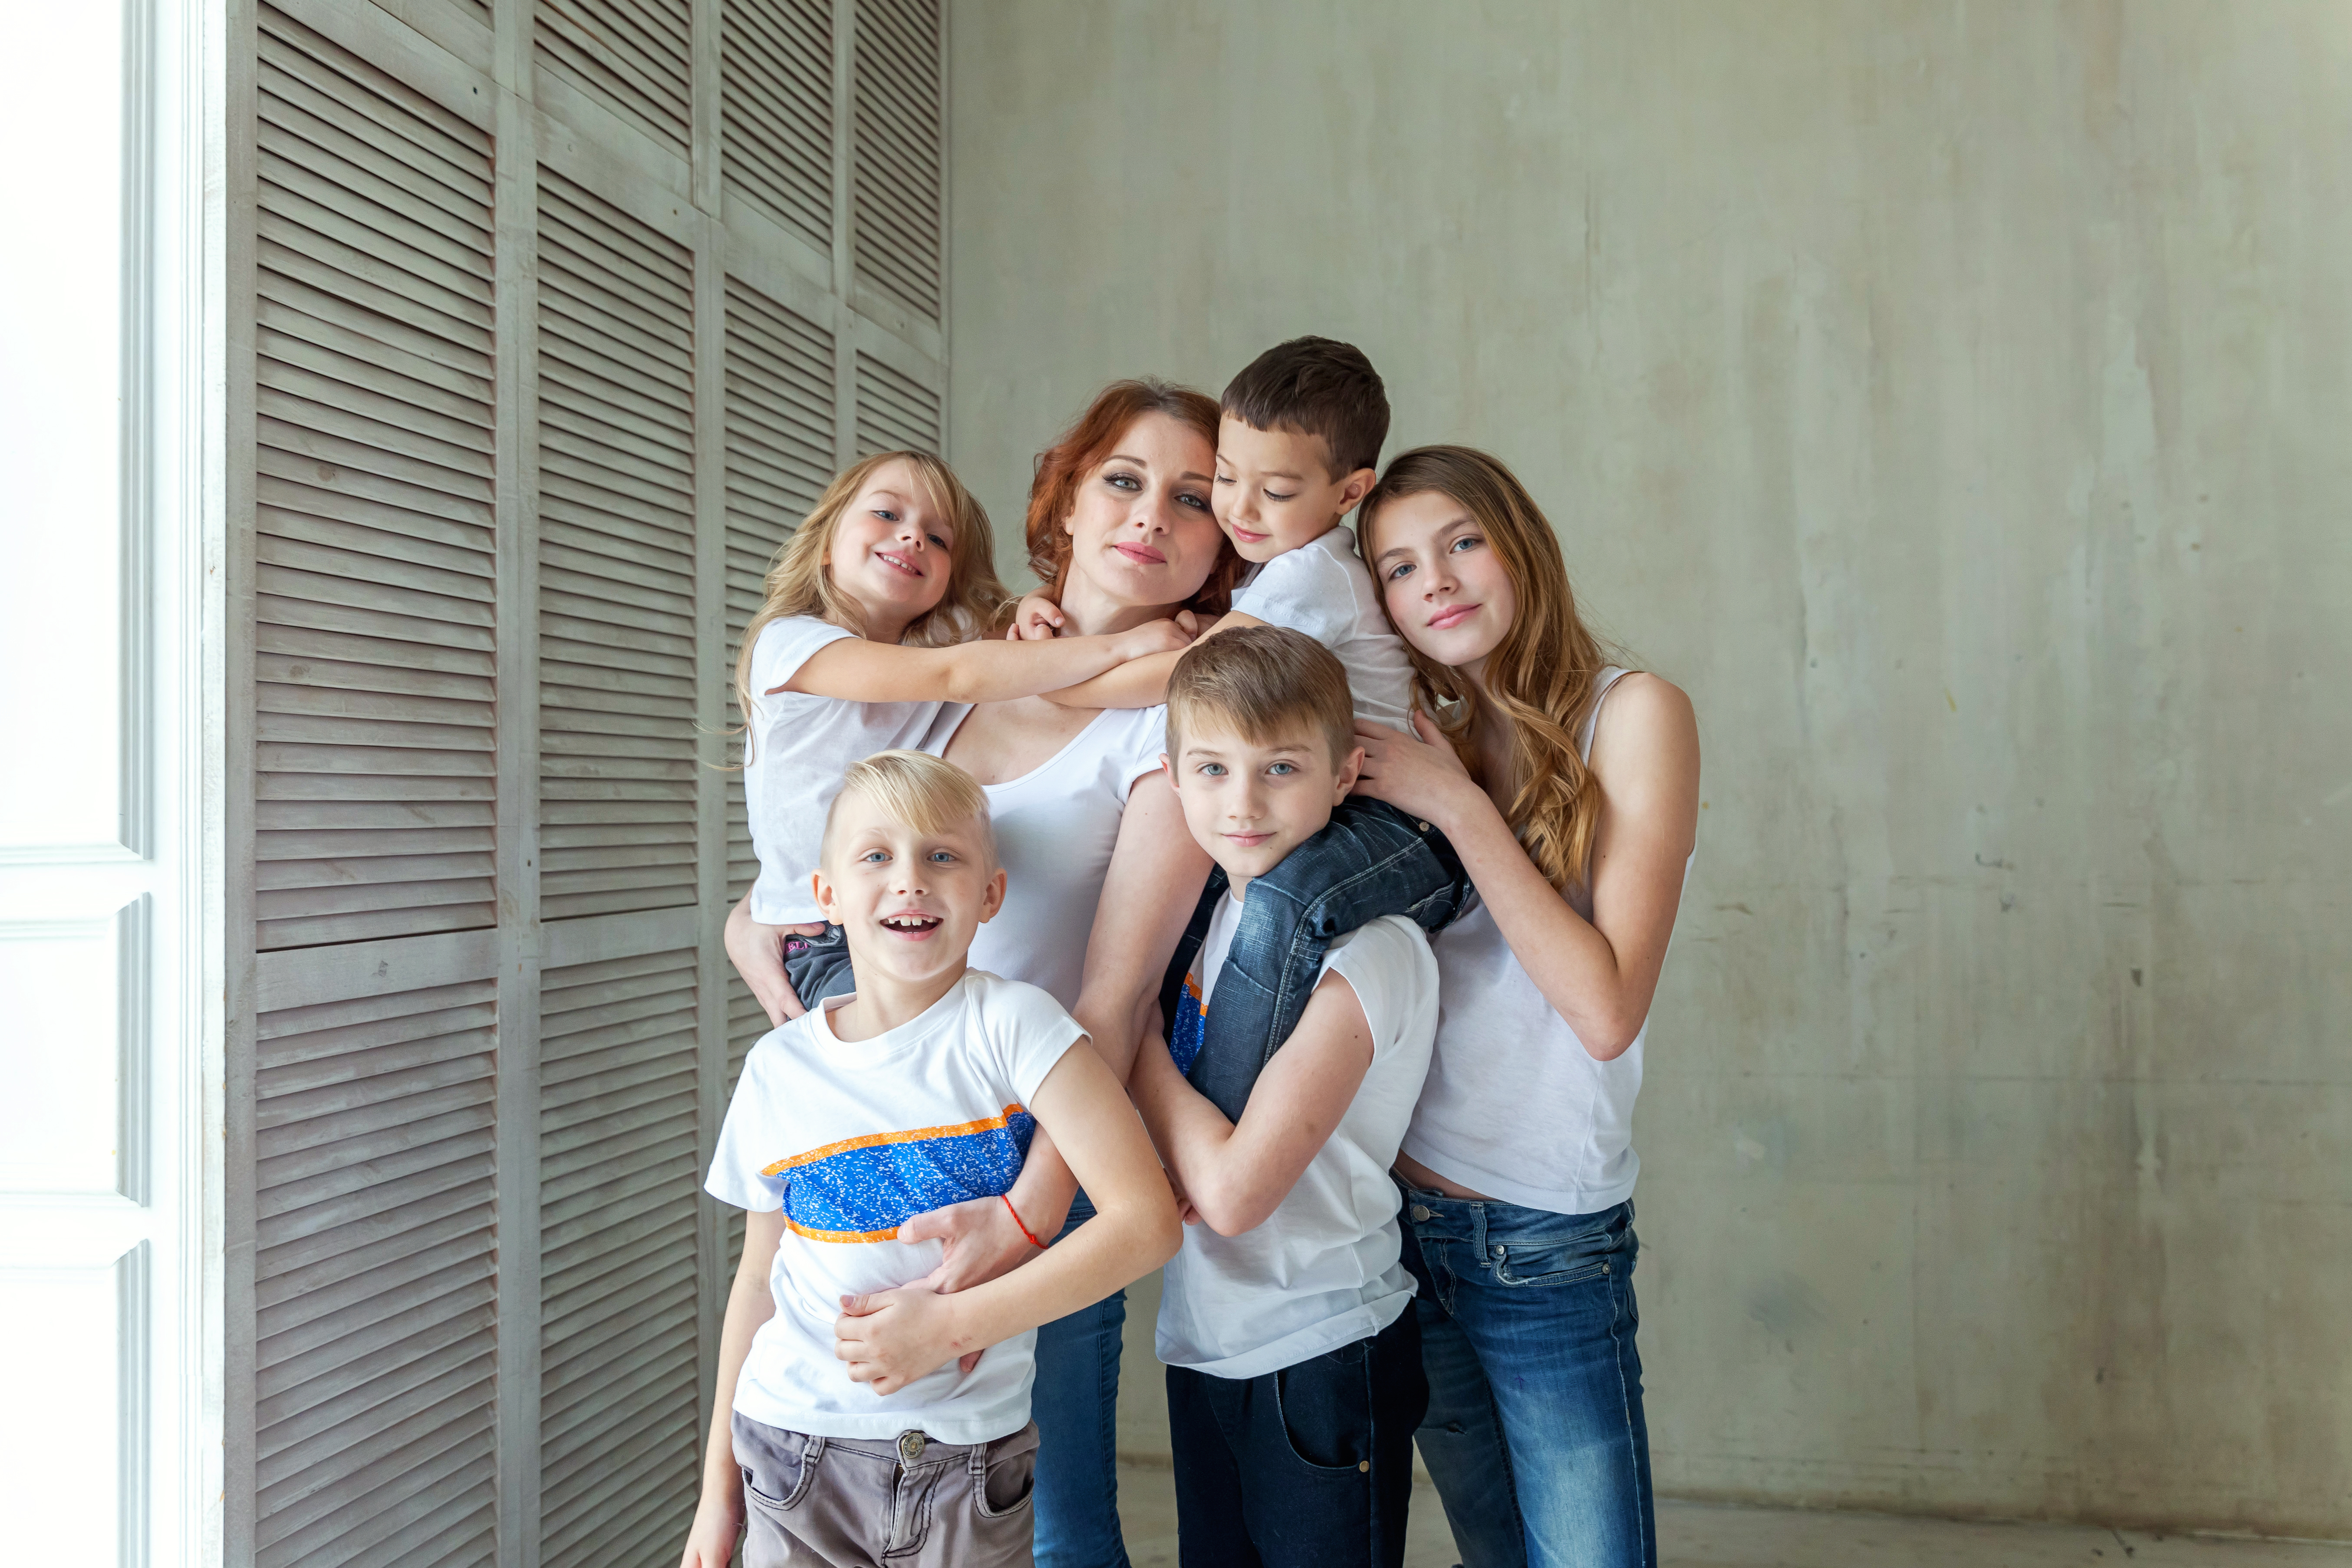 A woman posing with her five children | Source: Shutterstock